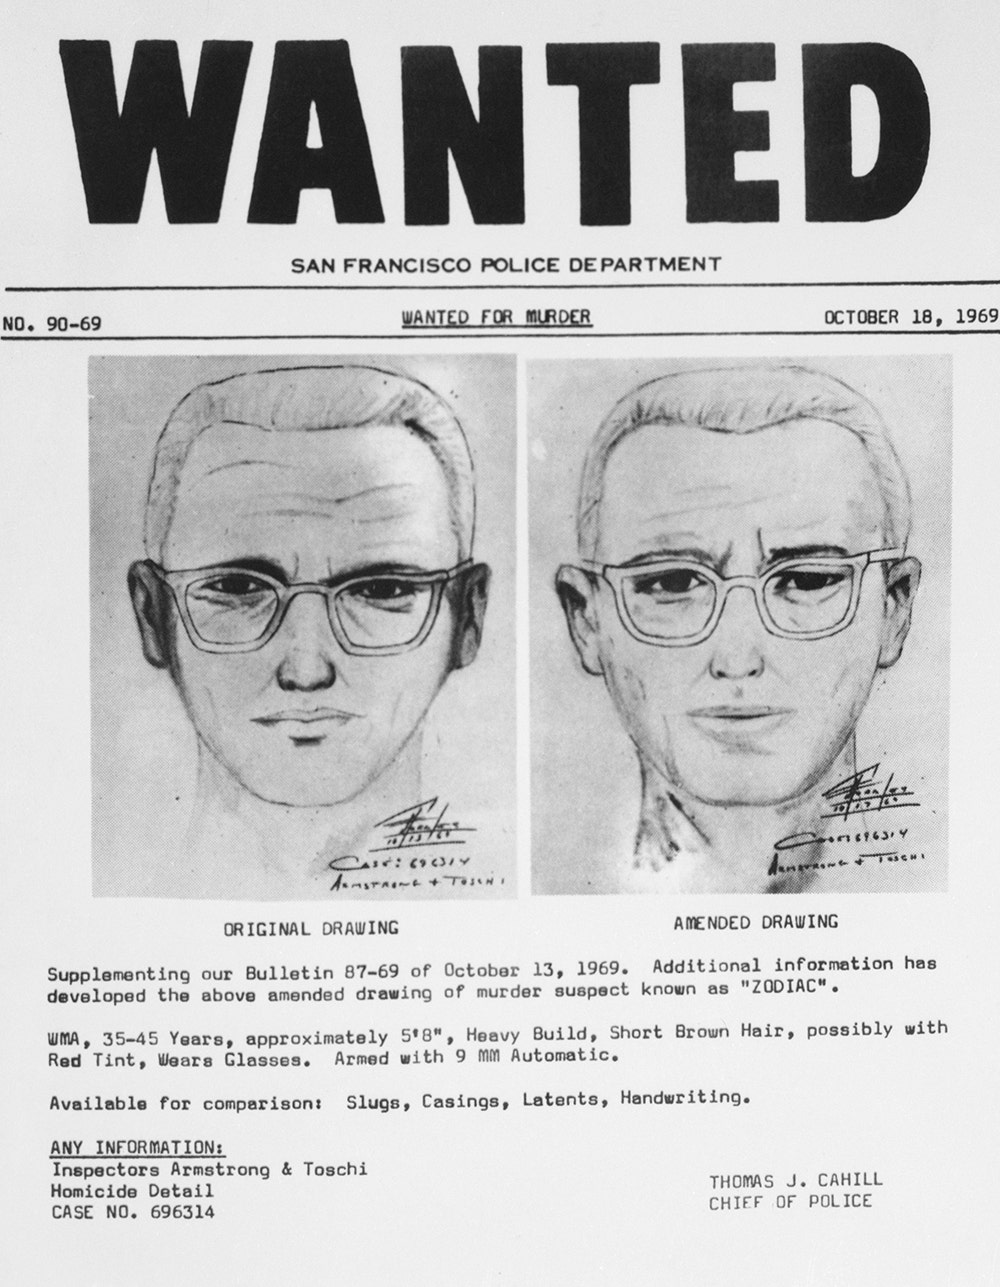 Wanted poster of the man believed to be the Zodiac killer